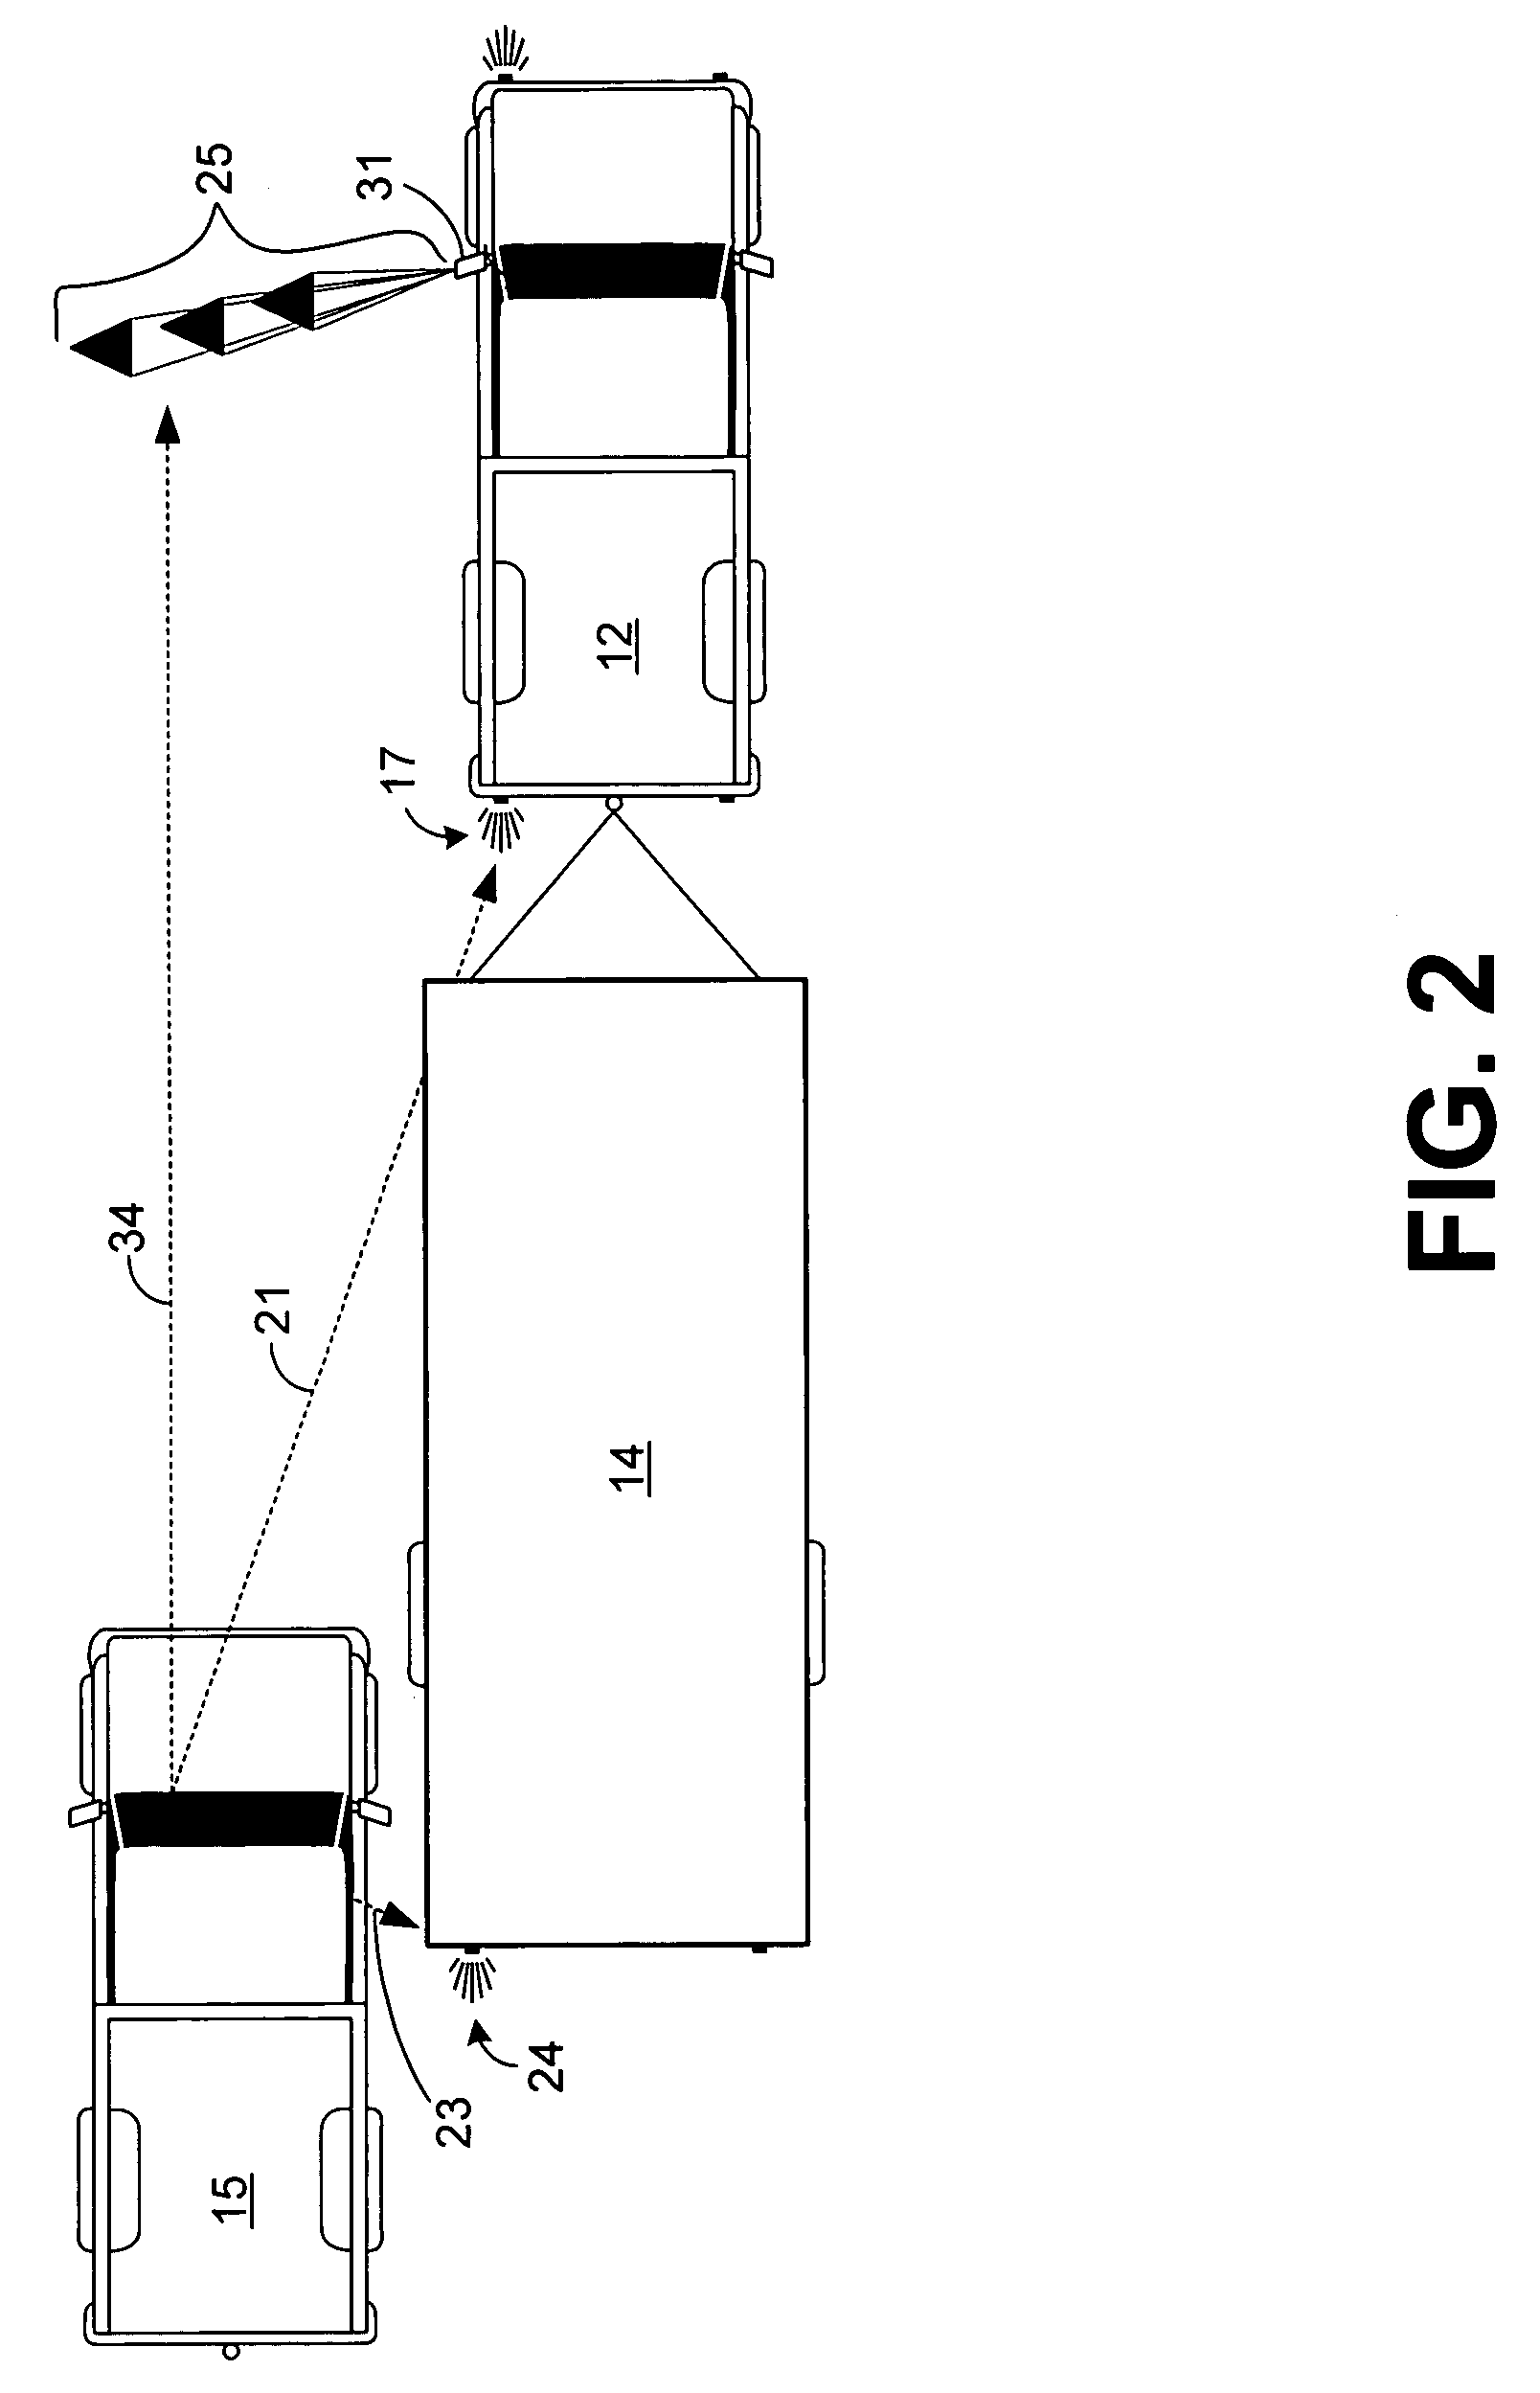 Method and apparatus for projecting a turn signal indication